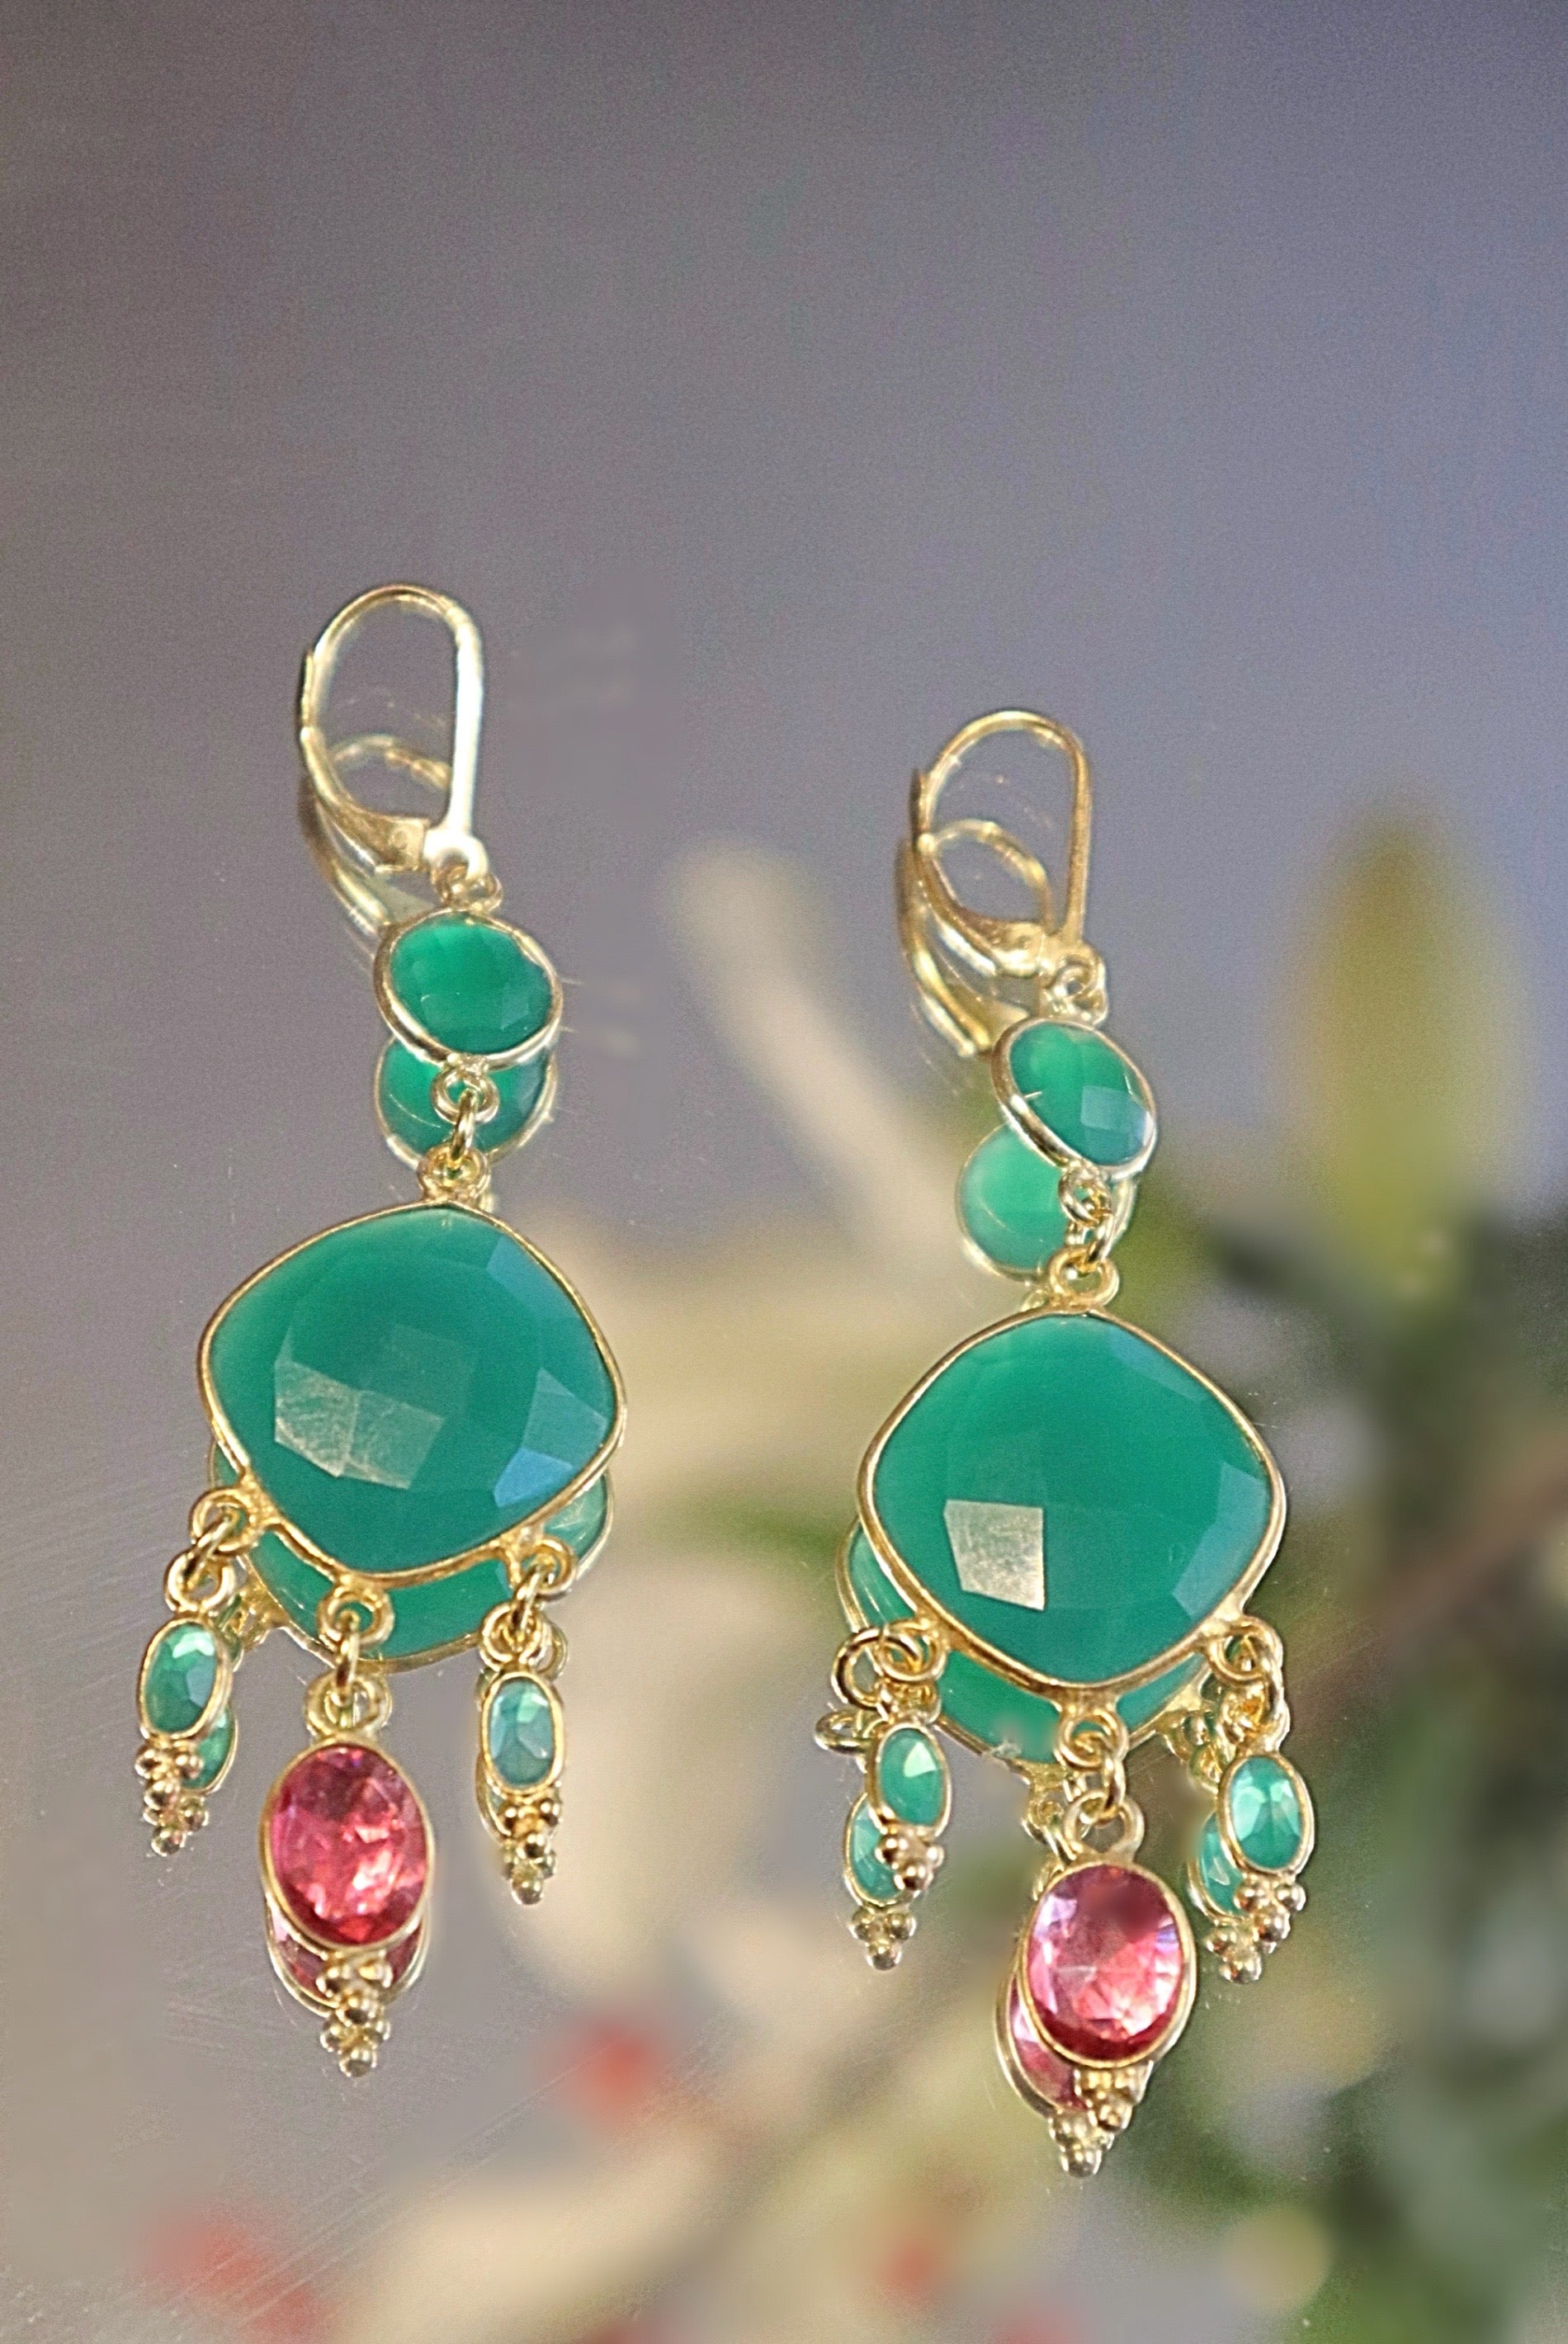 Enchanted Sparkle Earrings - Green Agate and Pink Tourmaline